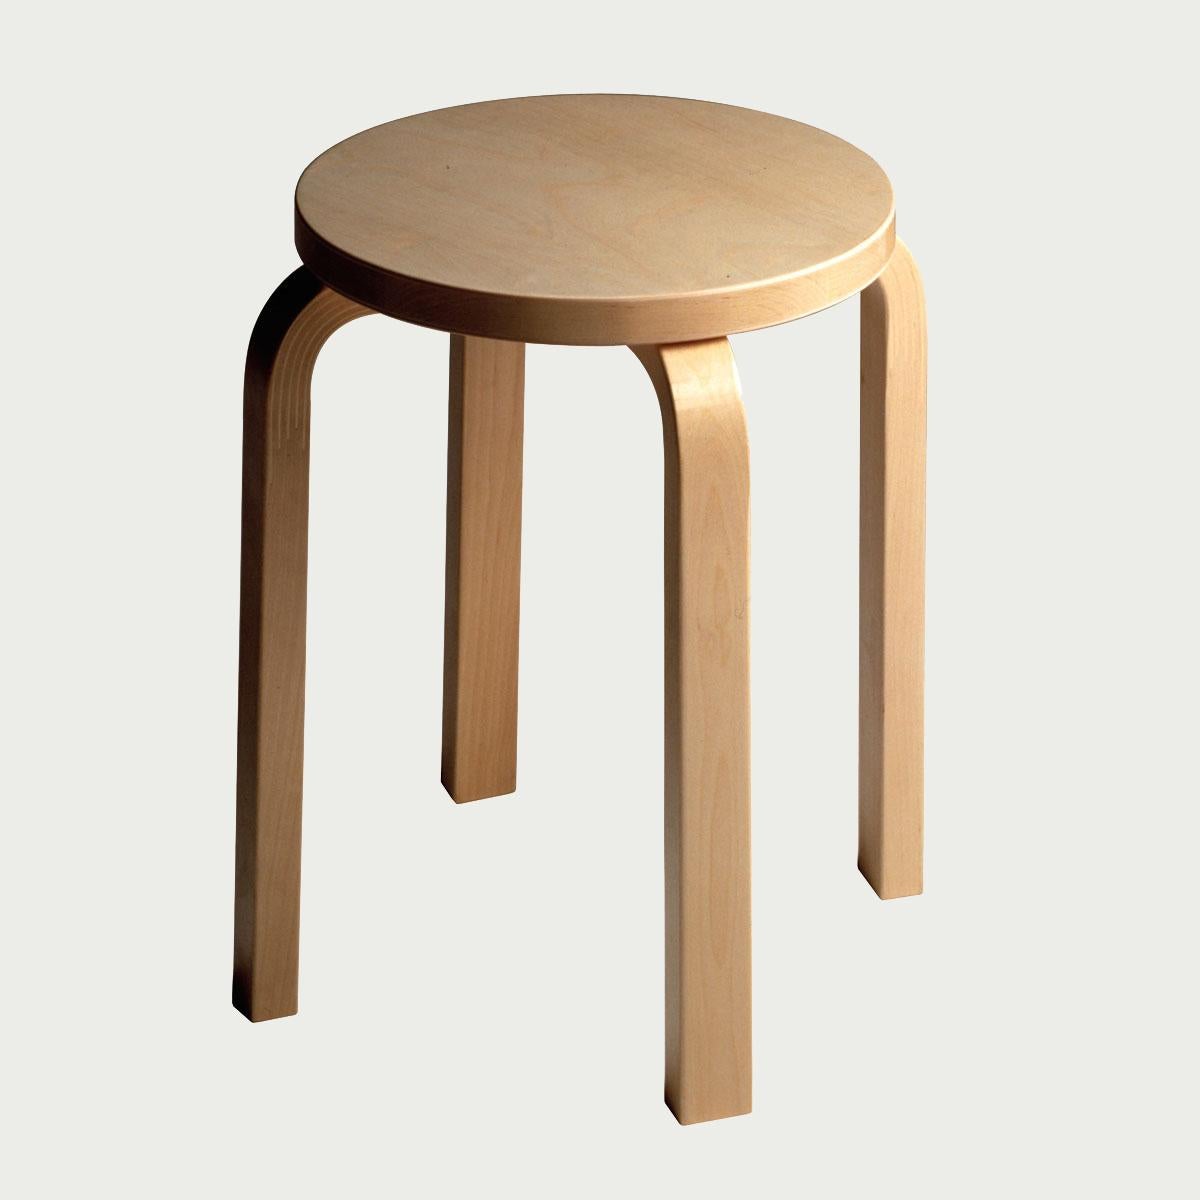 Finnish Authentic Stool E60 in Lacquered Birch with Laminate Seat by Alvar Aalto & Artek